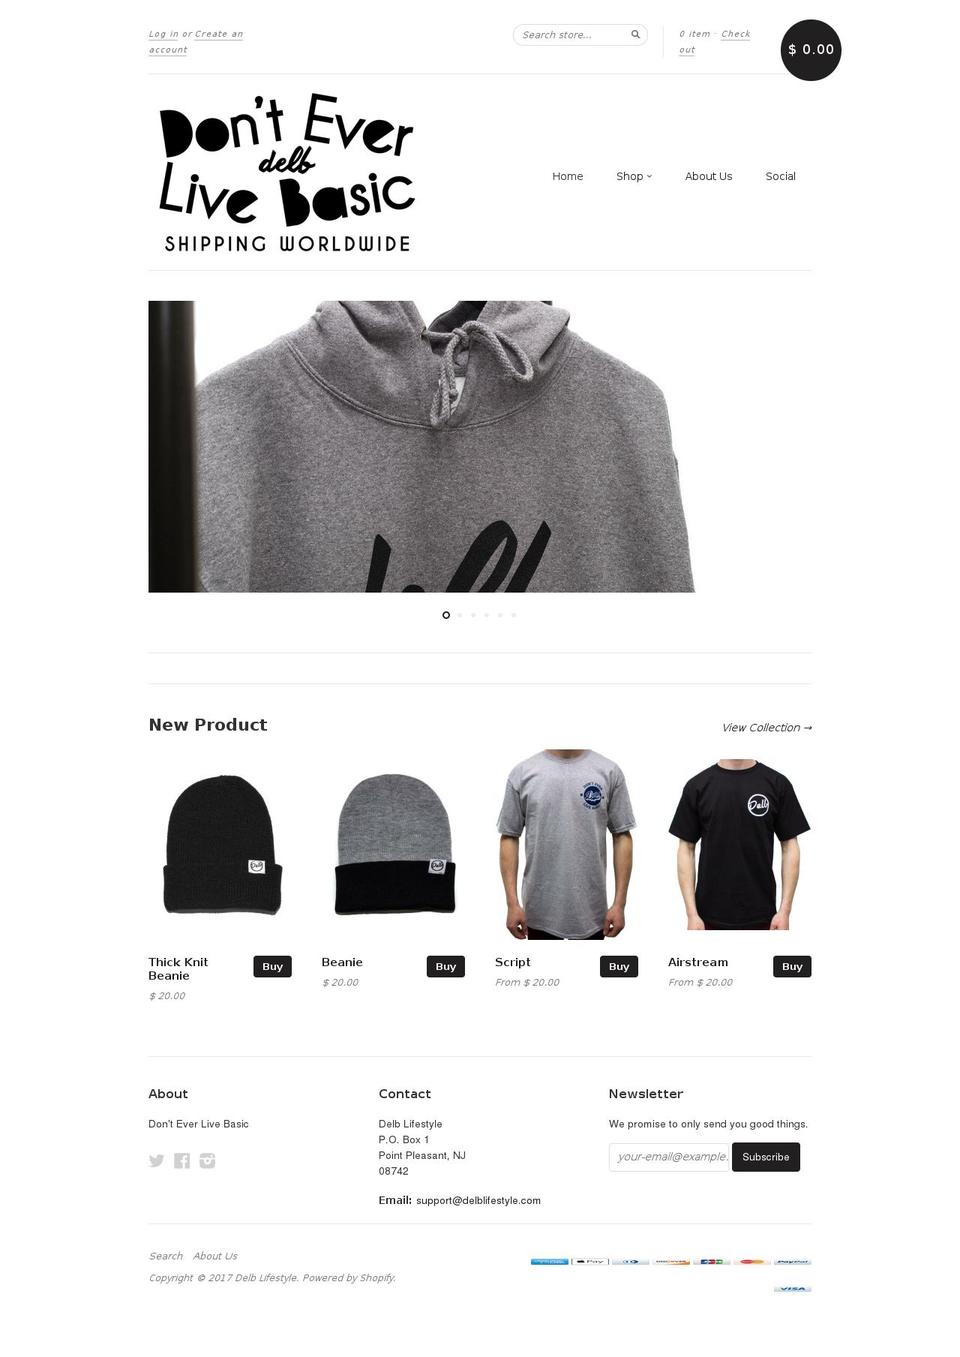 new standard Shopify theme site example delblifestyle.com